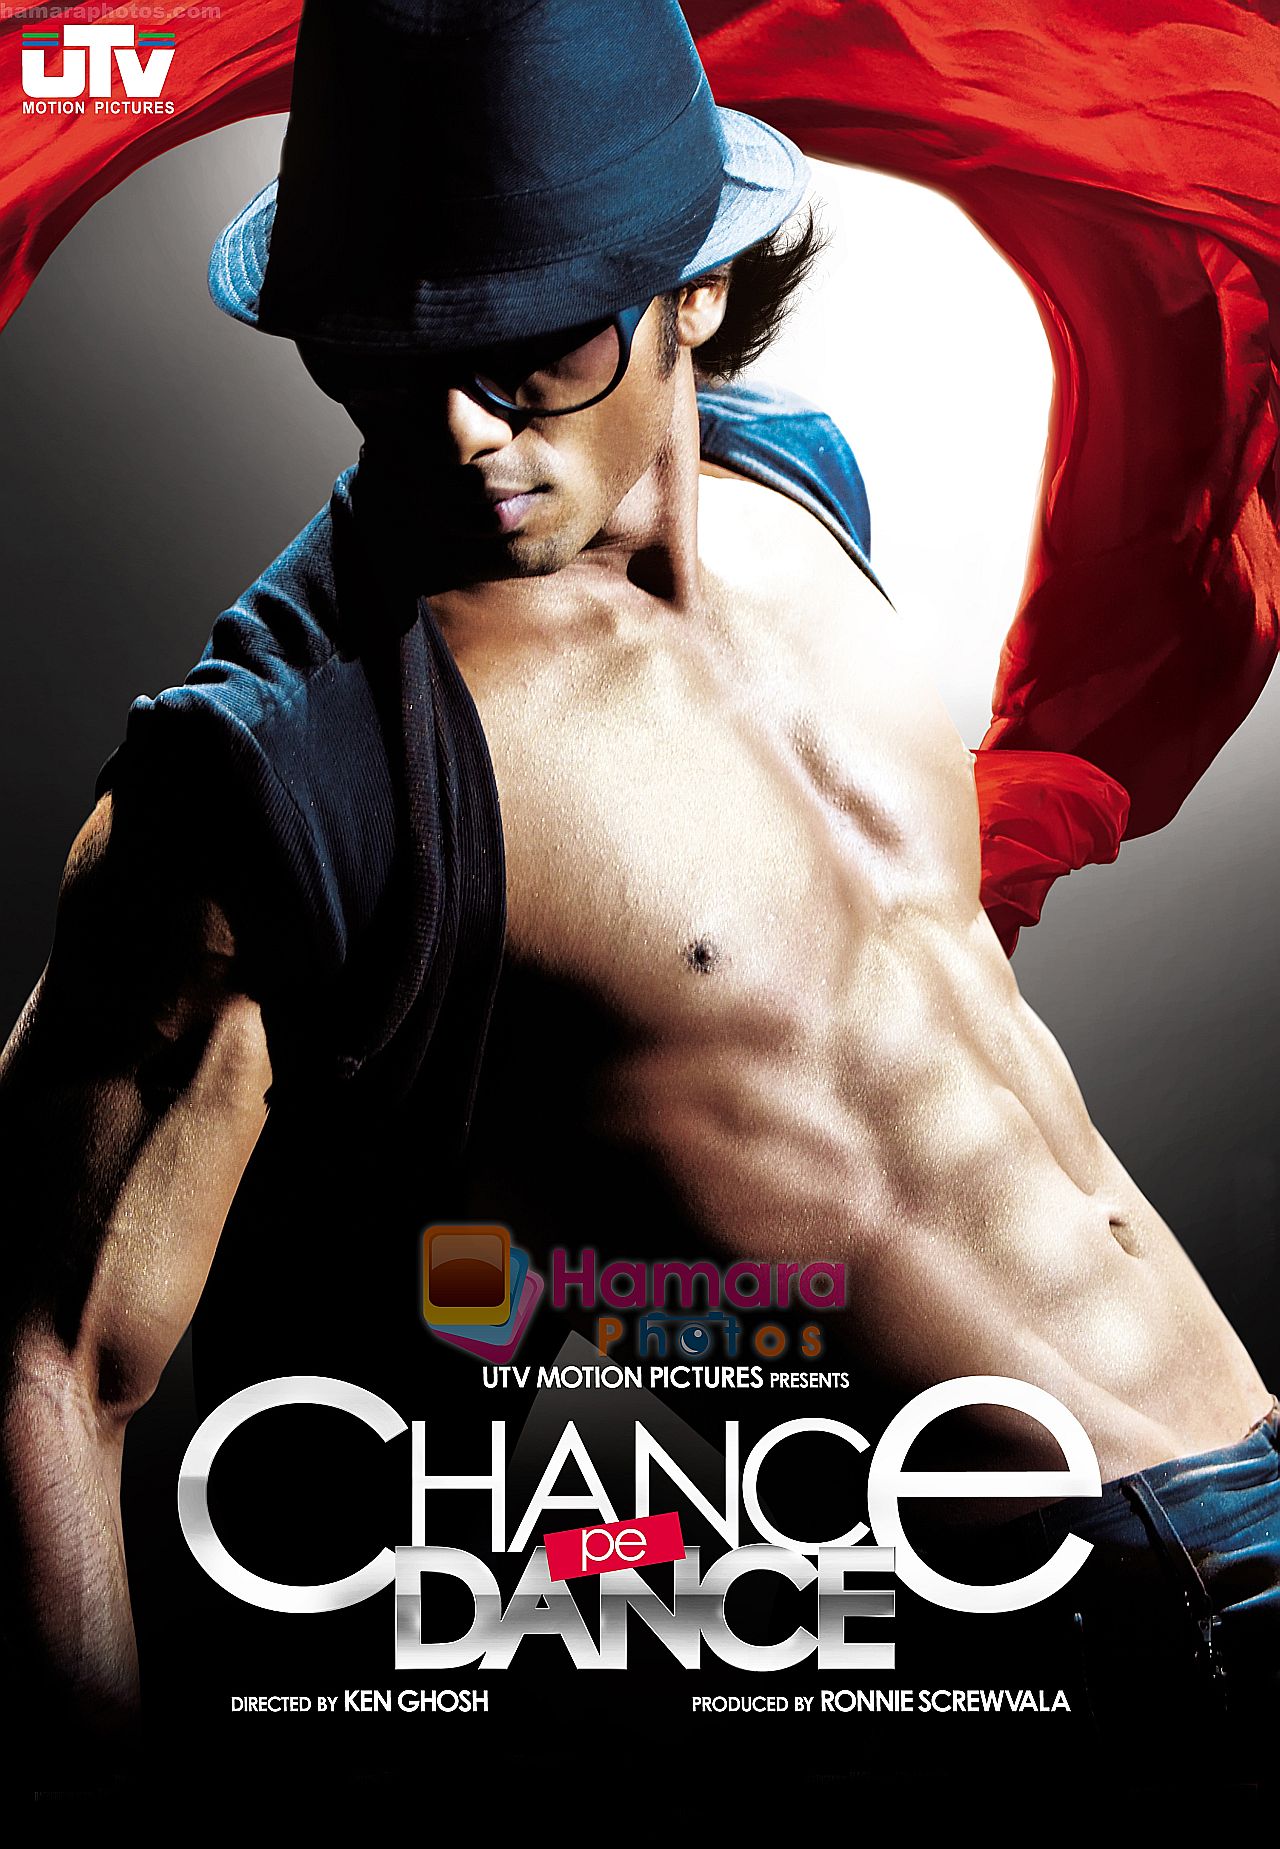 Shahid Kapoor in the still from movie Chance Pe Dance